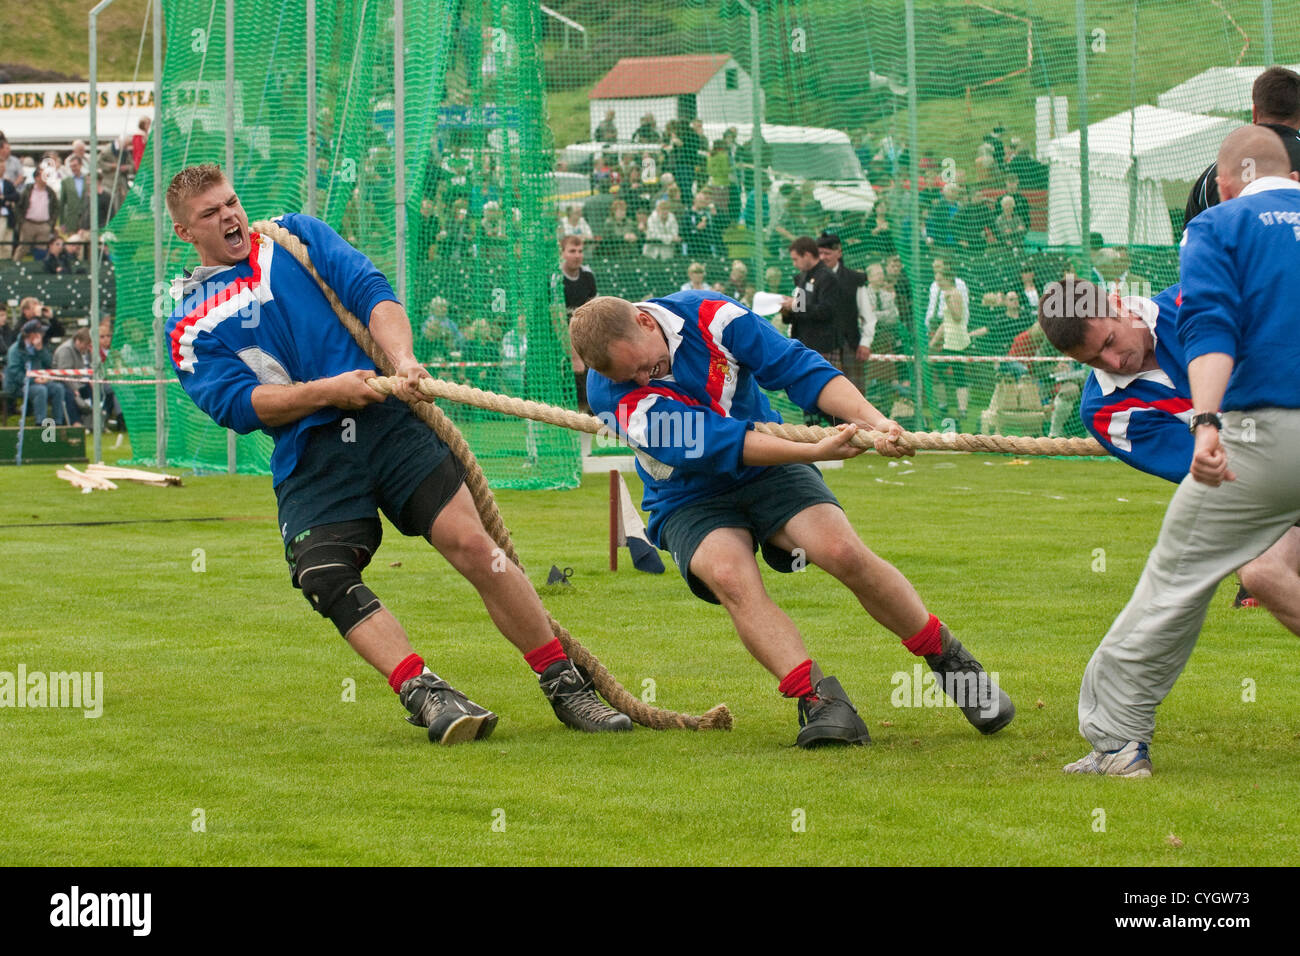 Teams taking part in a 'Tug of War' event at a Scottish Highland Games Stock Photo